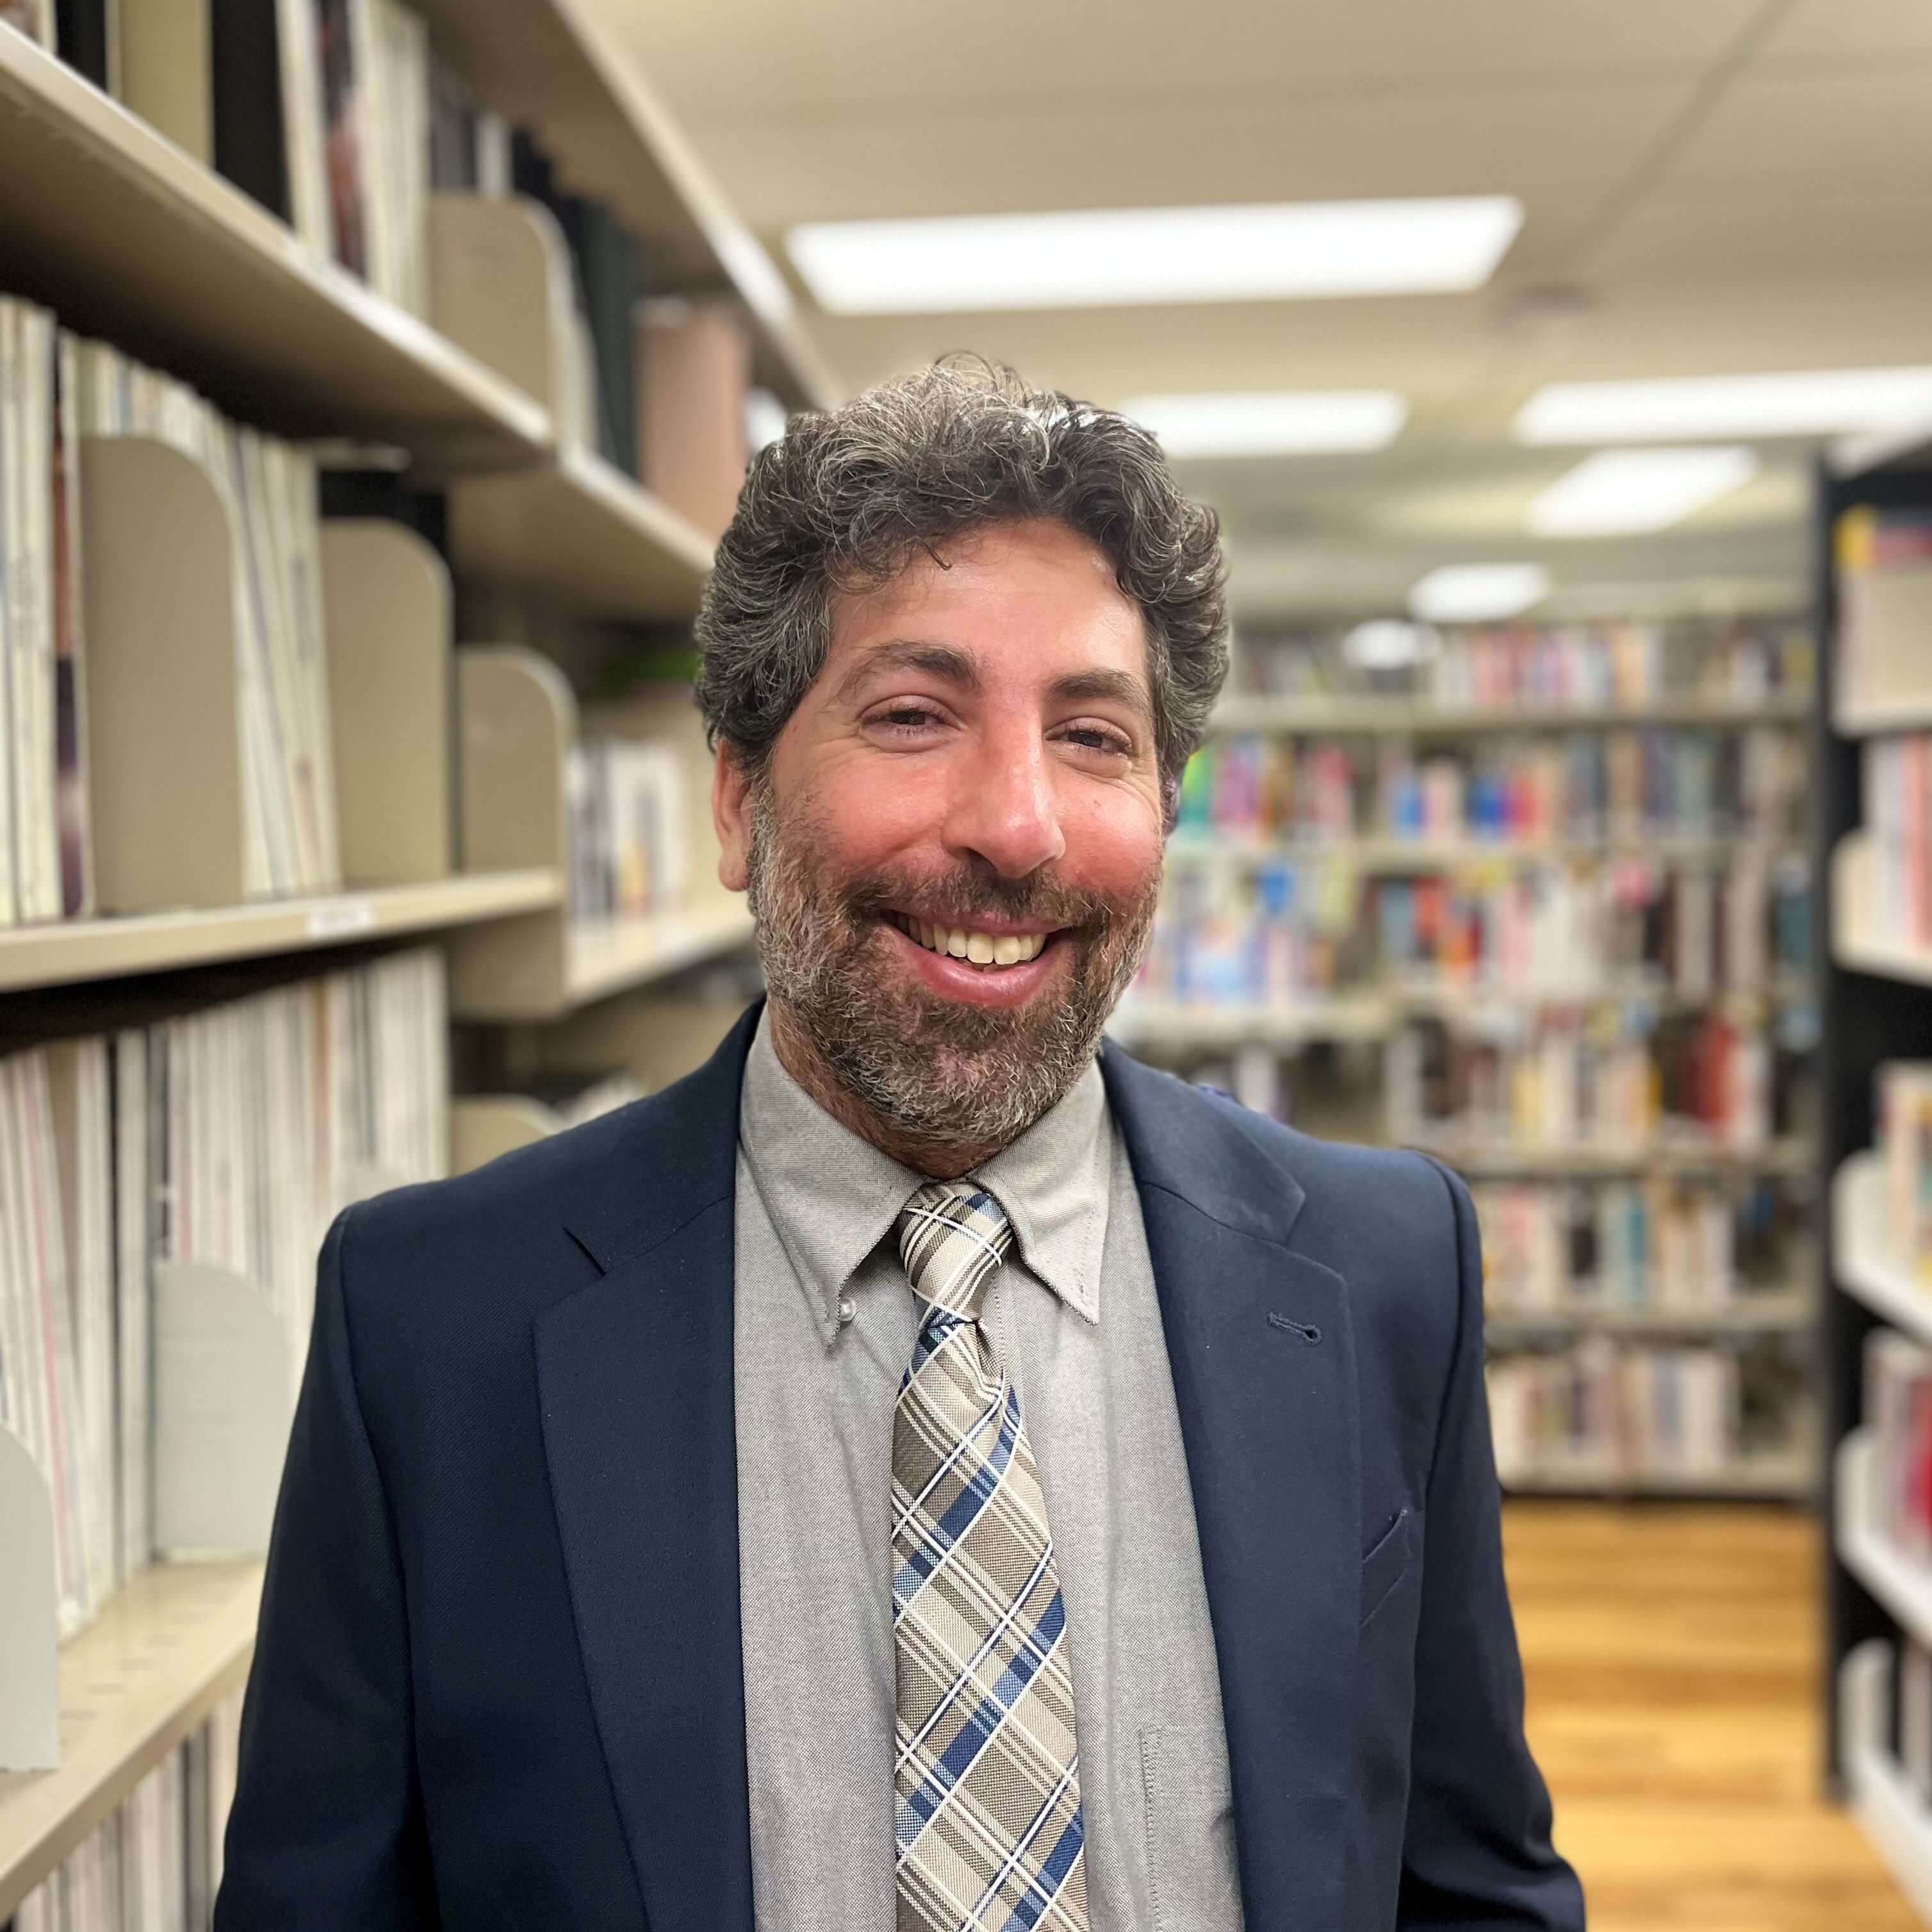 A jovial man with curly gray hair, sporting a blue suit, tie, and a gray shirt, grinning in a library setting with bookshelves in the background.